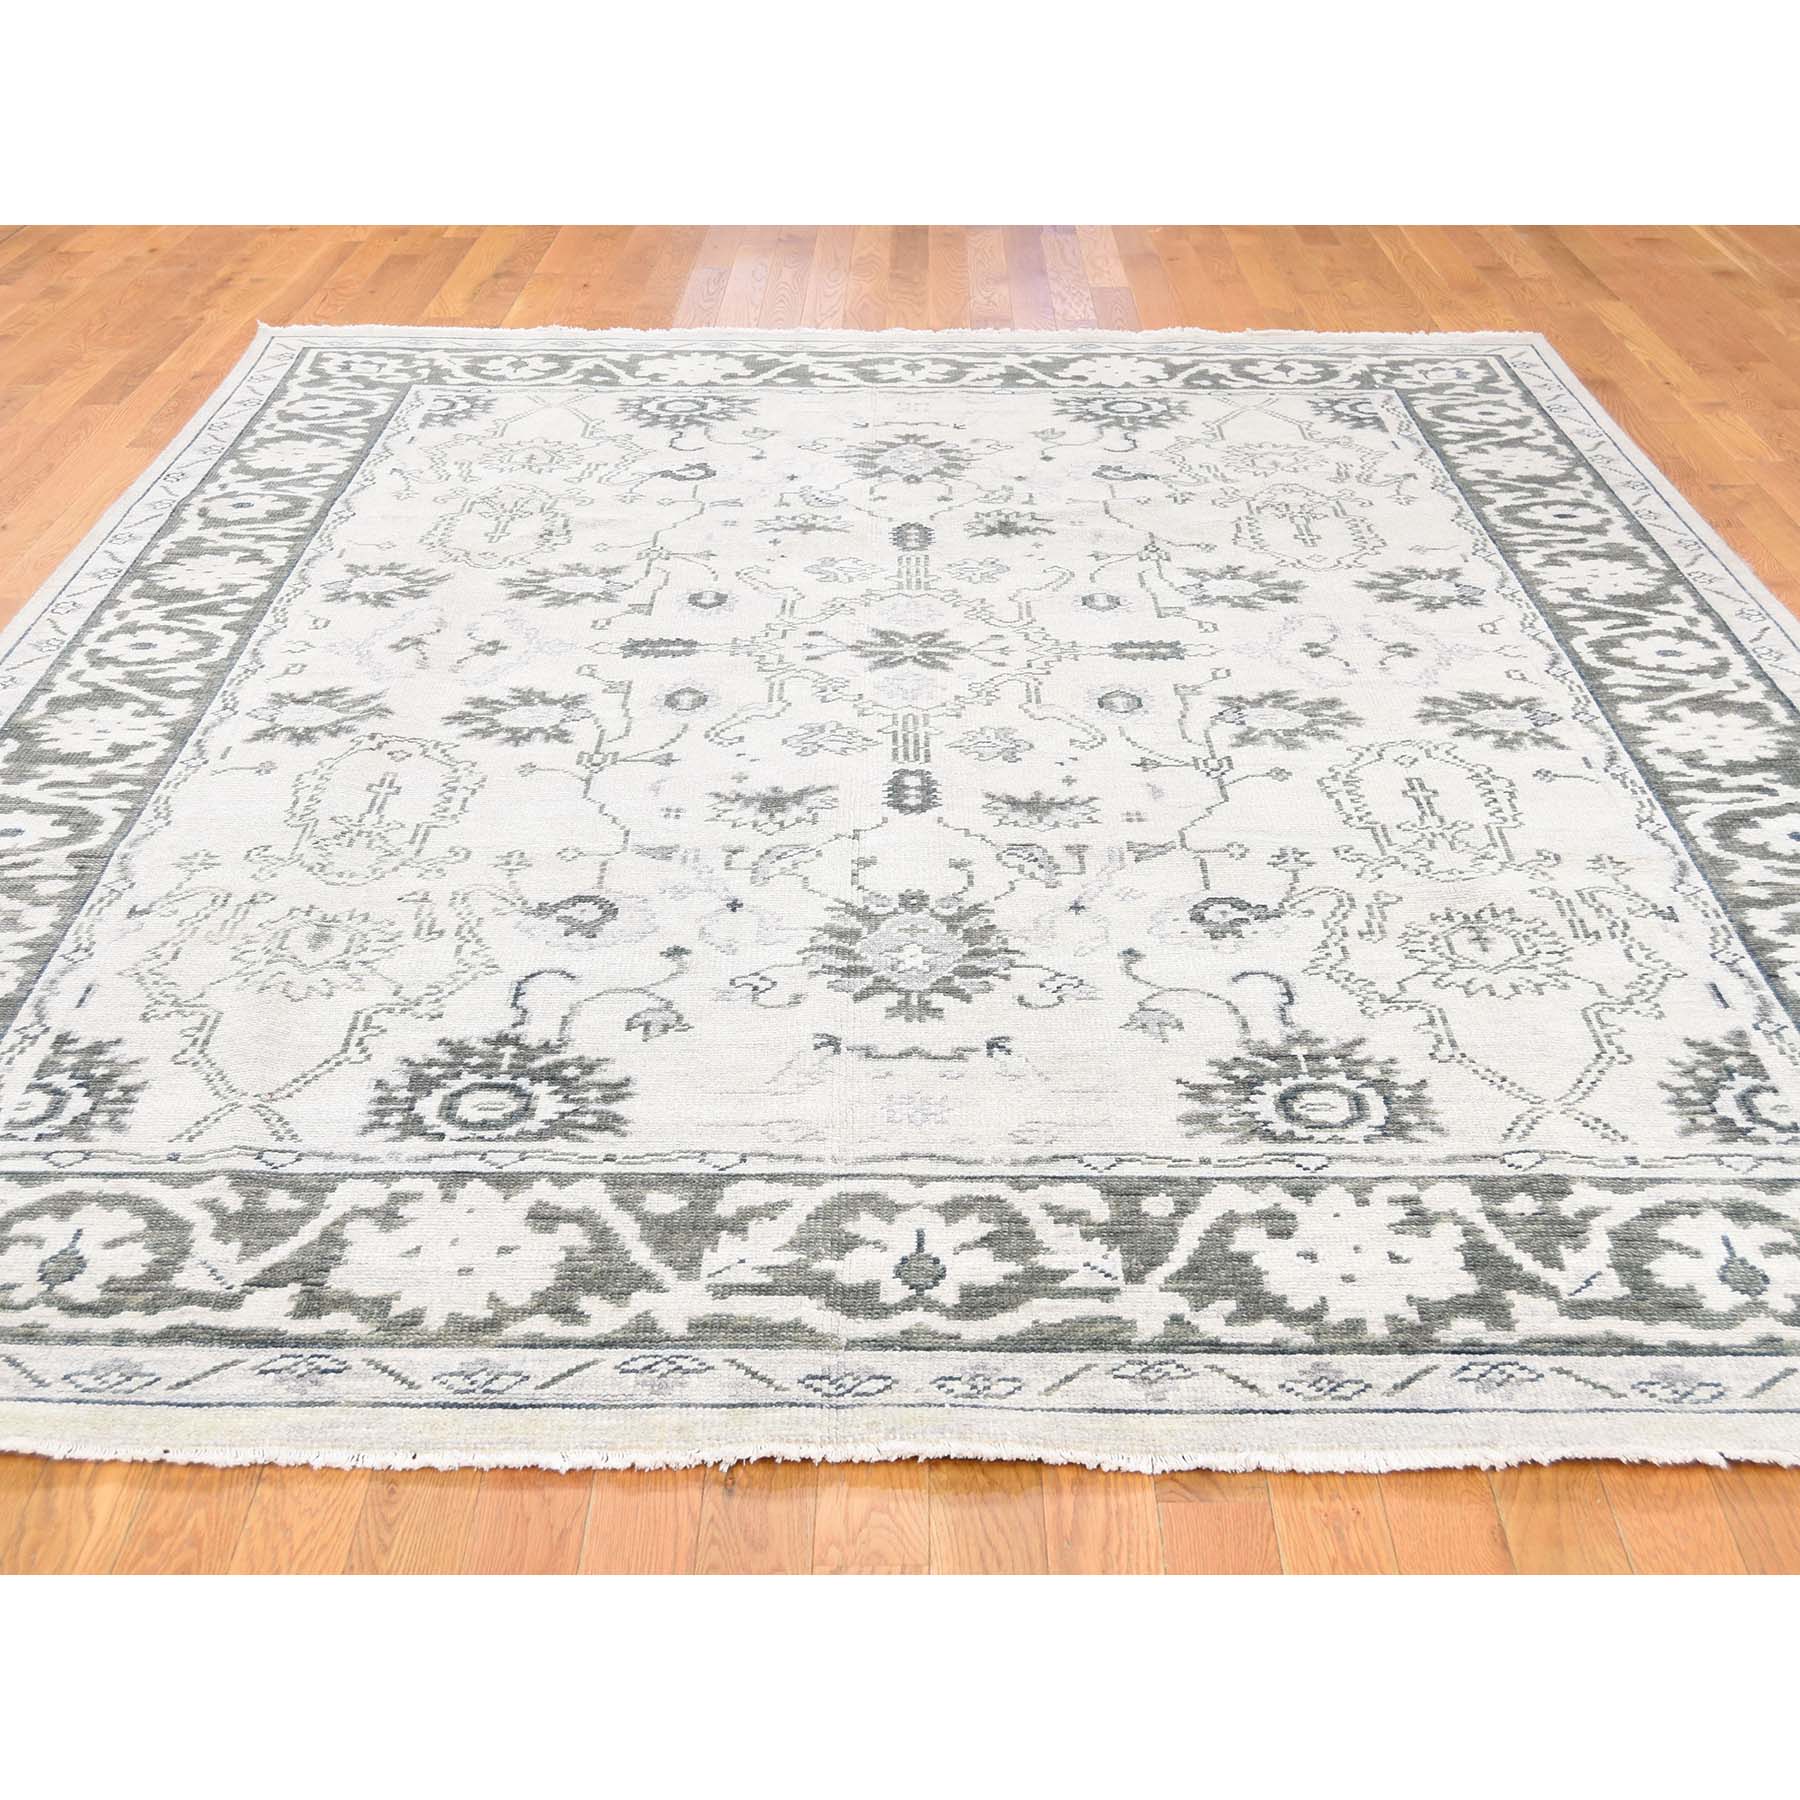 8-x10- Hand-Knotted Turkish Knot Oushak Pure Wool Oriental Rug 